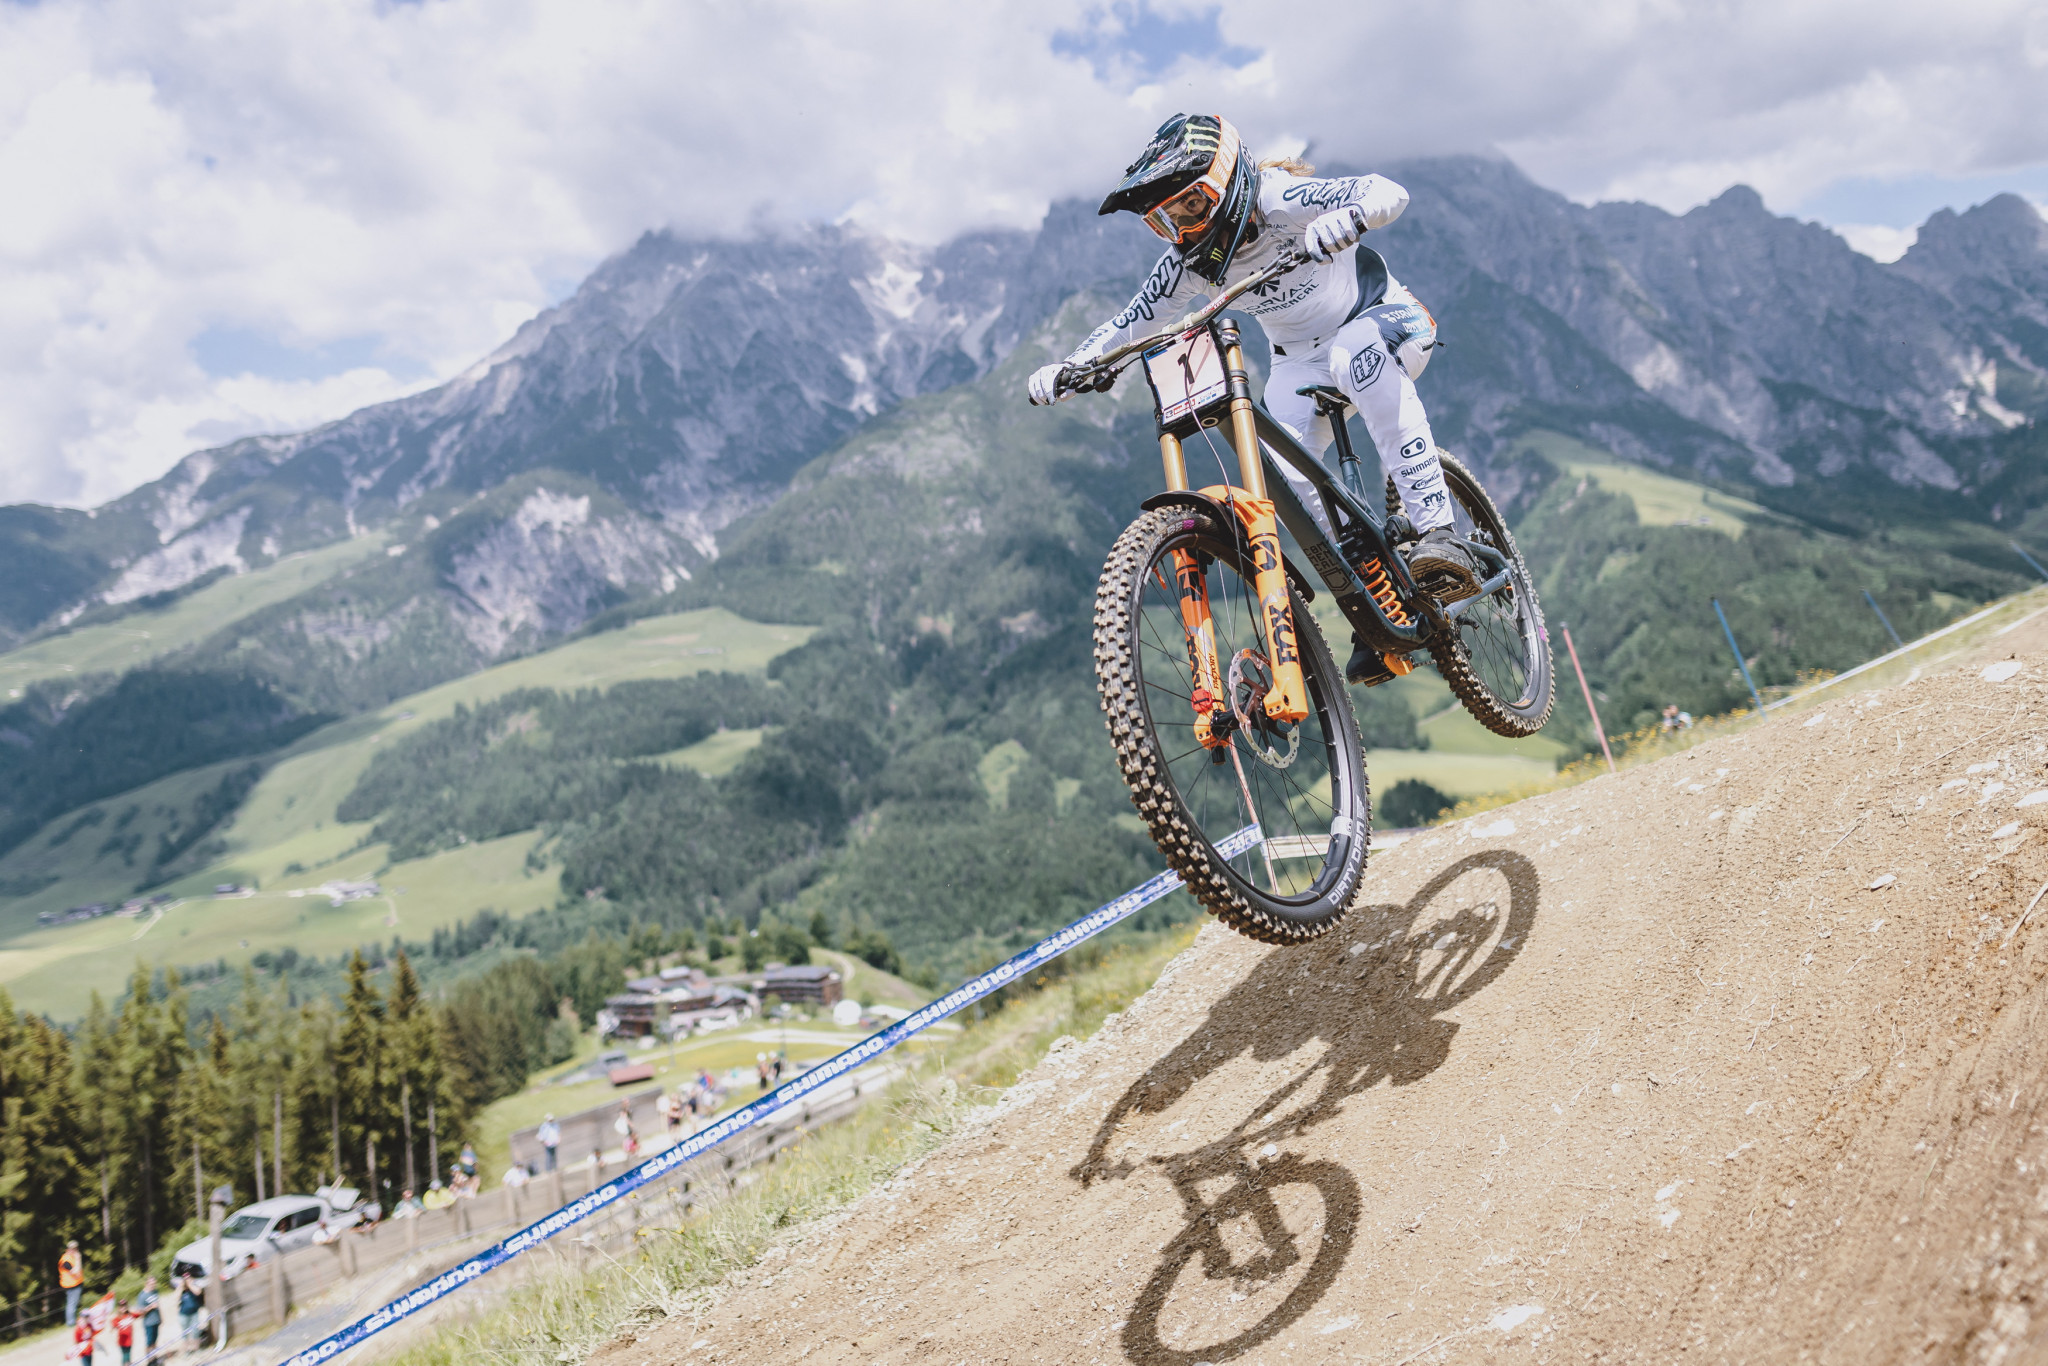 Balanche and Walker storm to victories at UCI Mountain Bike World Cup in Leogang